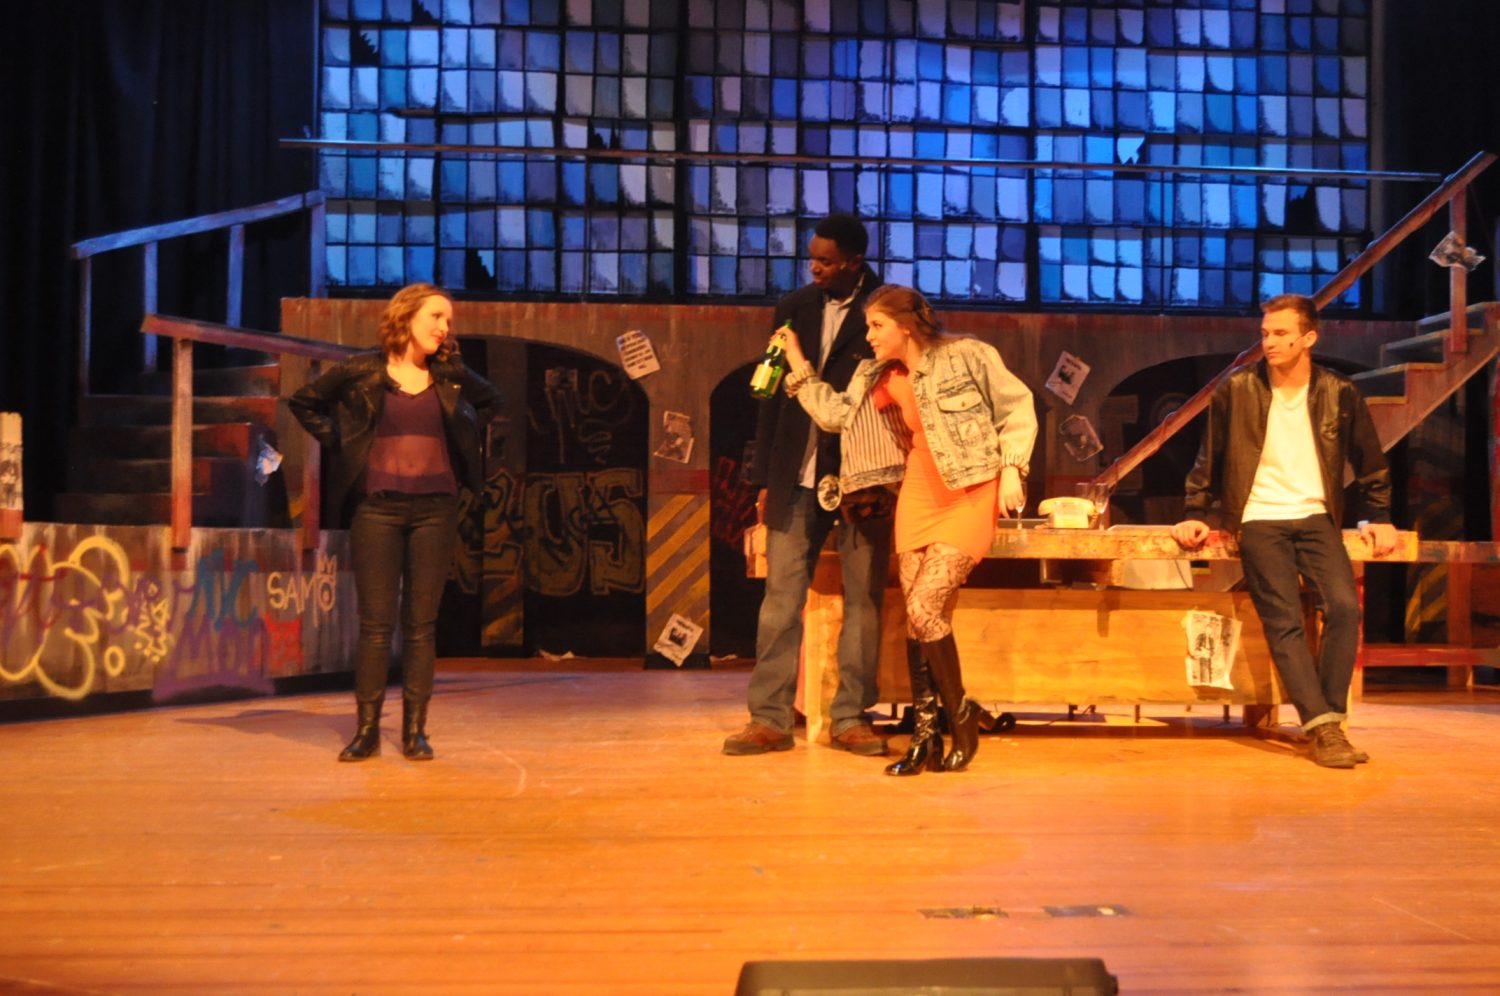 Grady Thespians prepare for upcoming performance of Rent